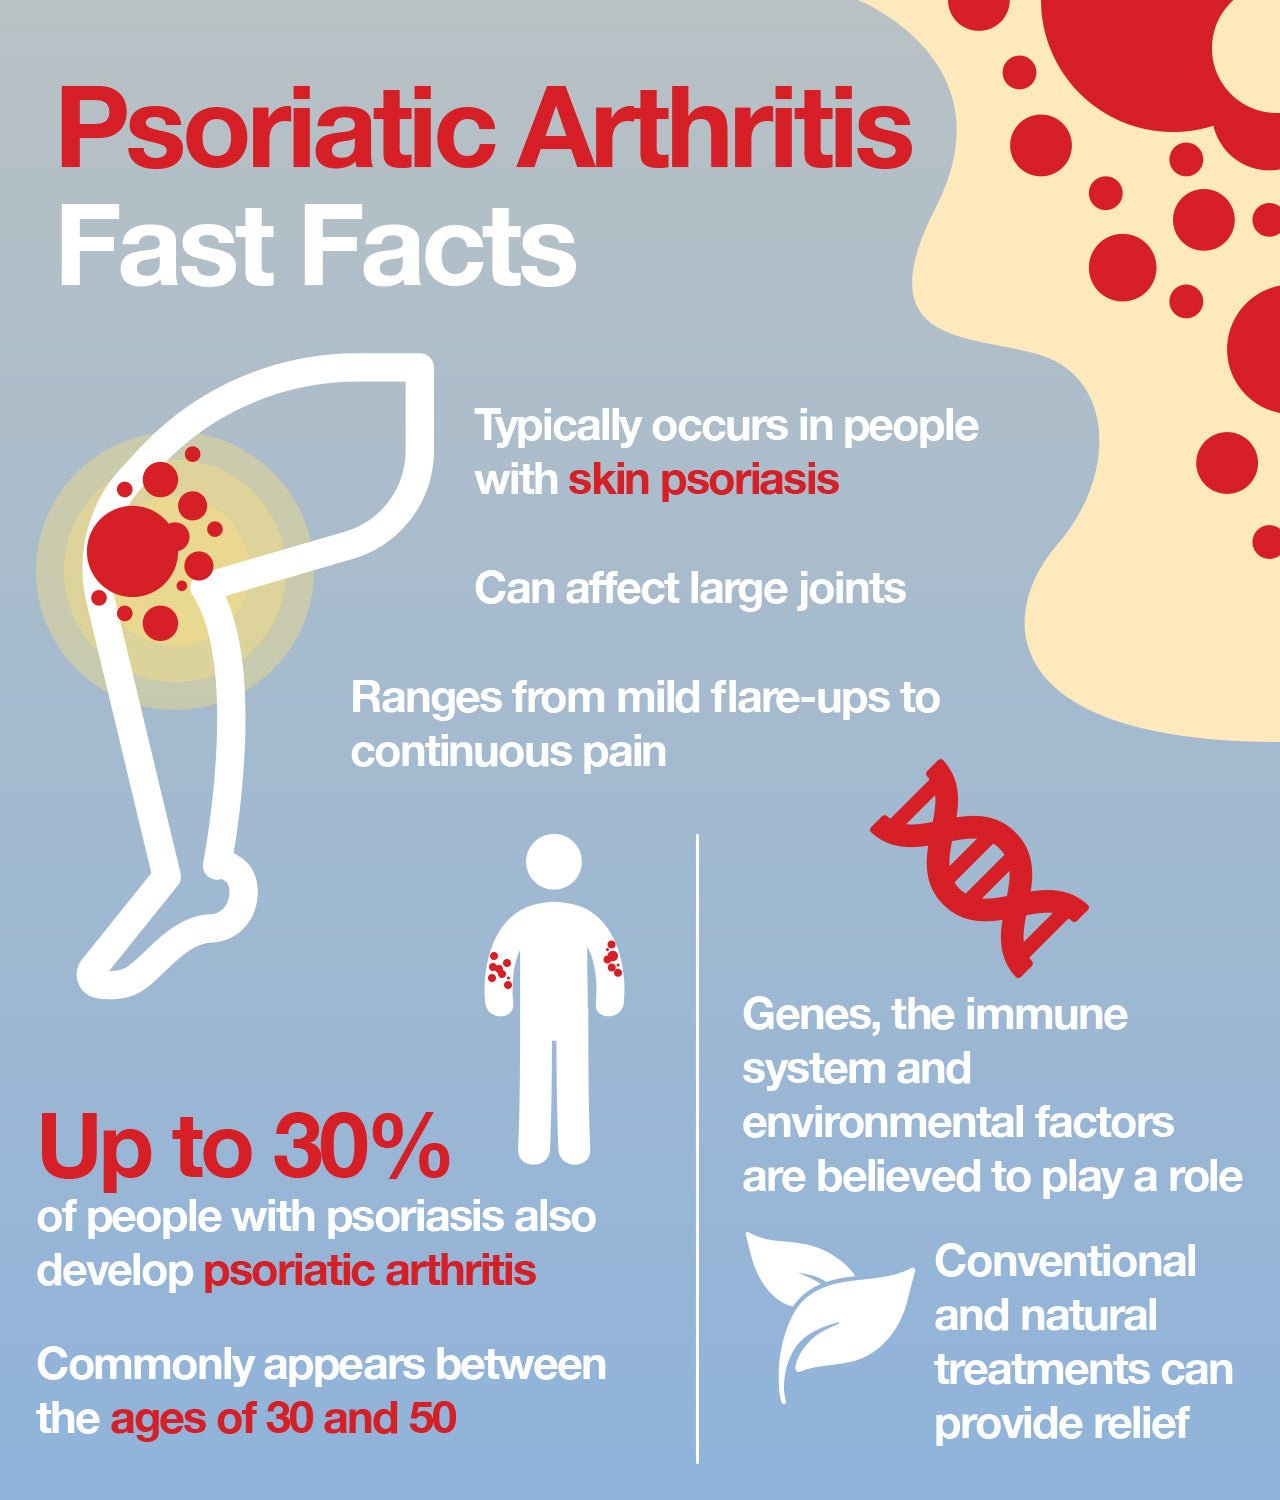 What Is Psoriatic Arthritis? Causes, Symptoms and Treatment